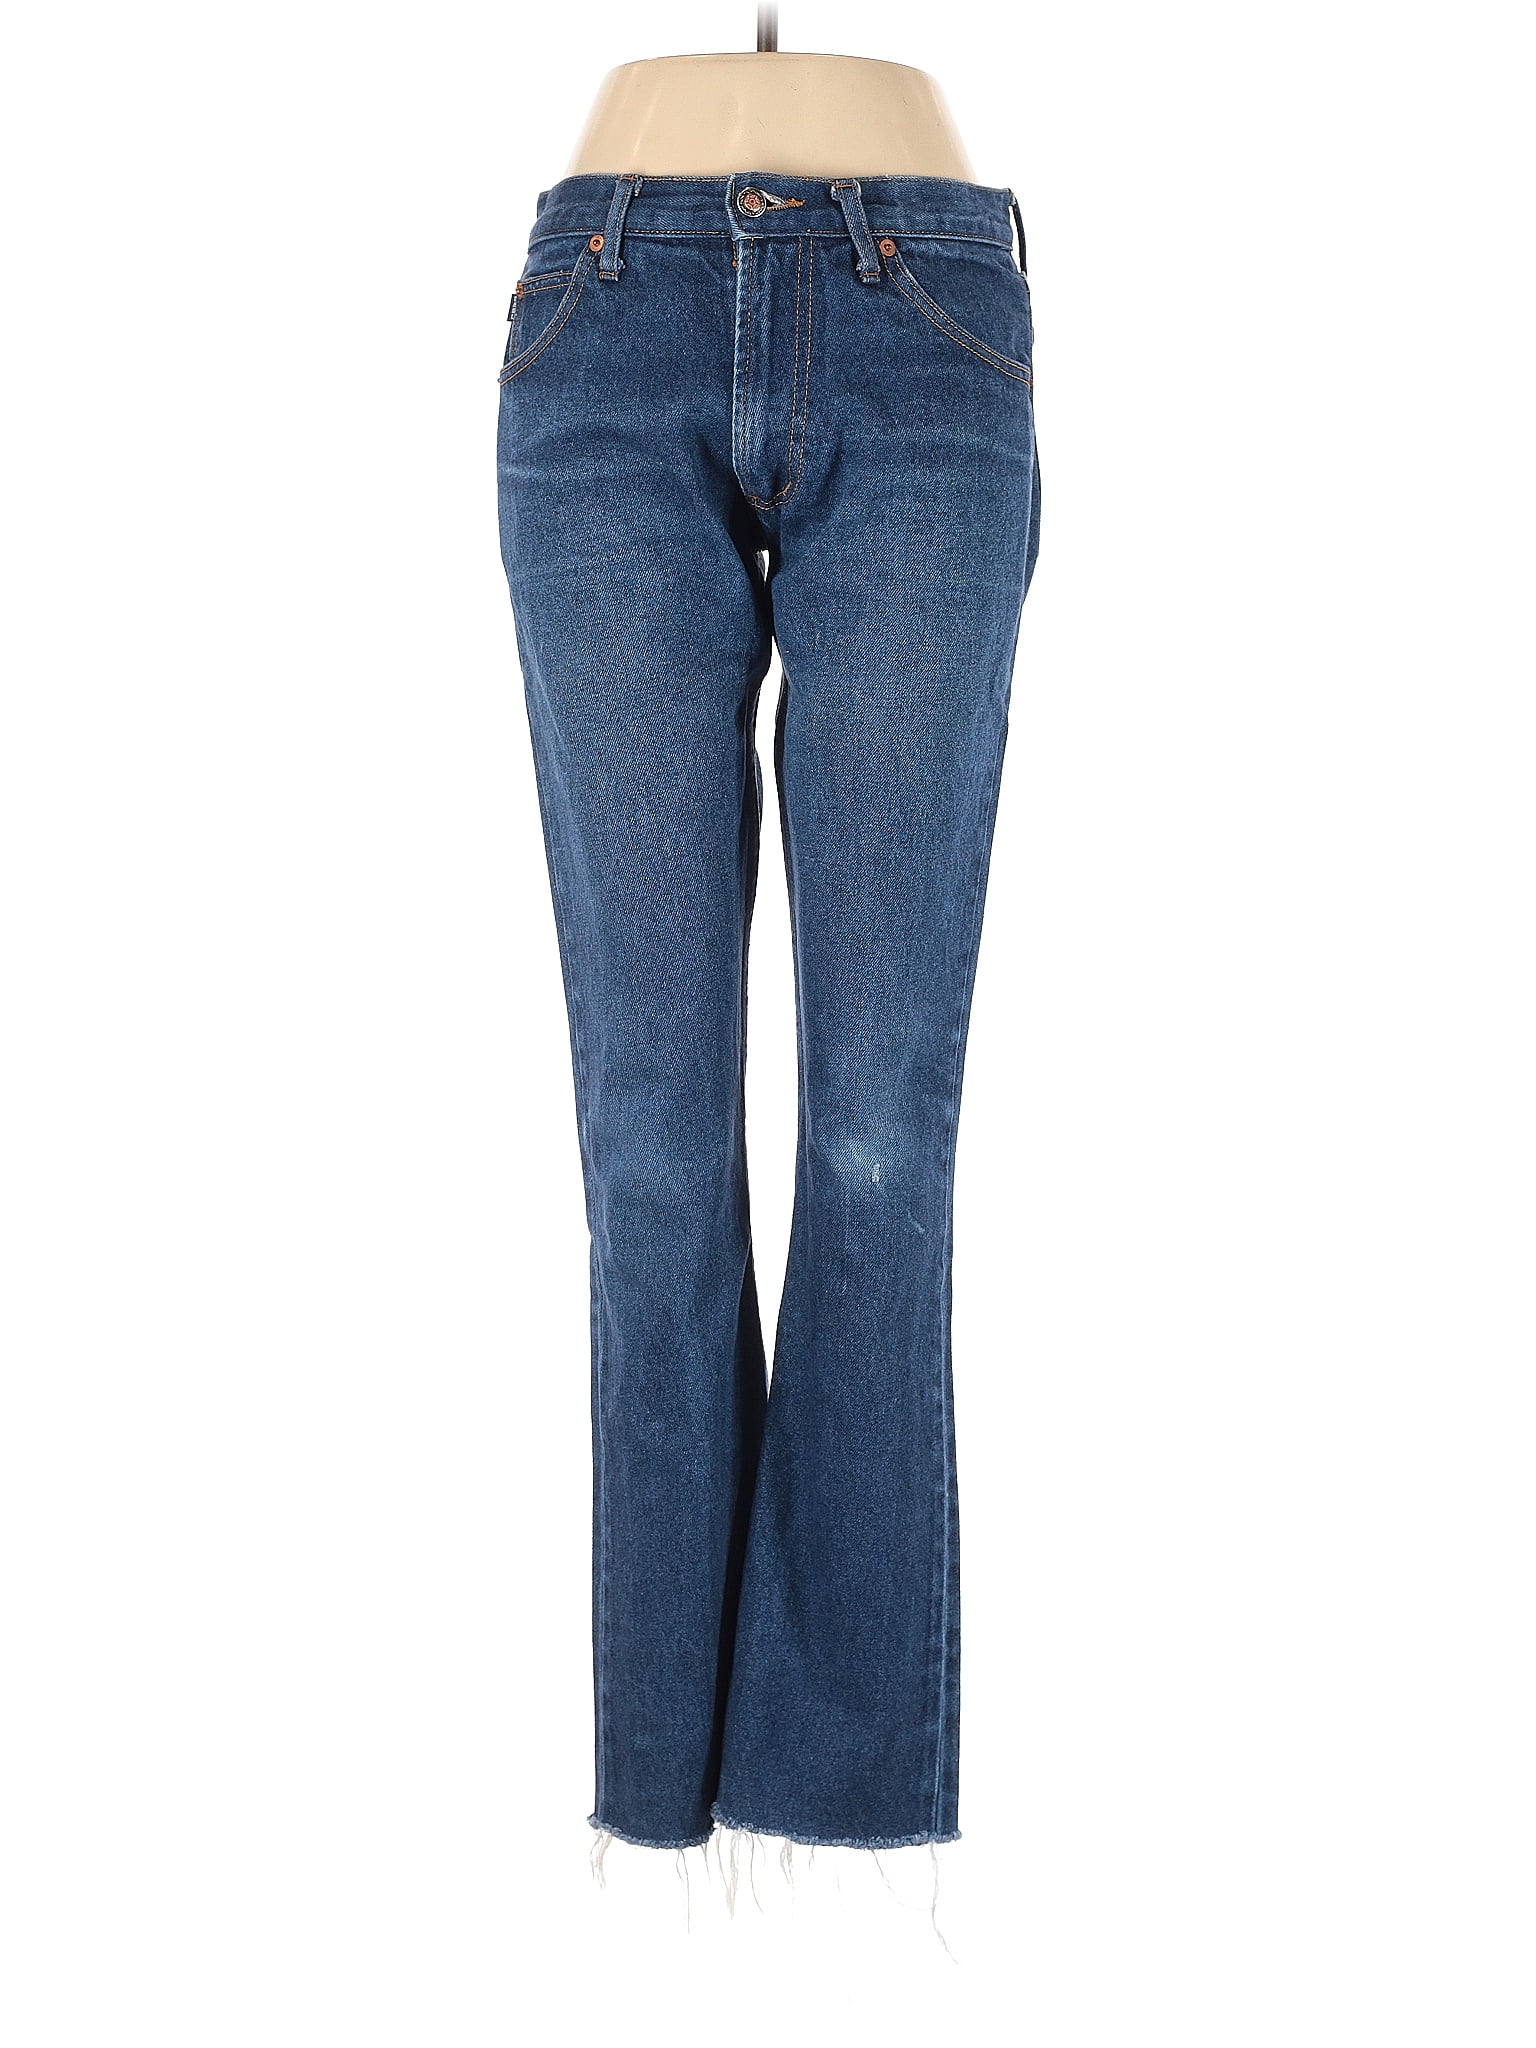 Earl Jean 100% Cotton Solid Blue Jeans Size 8 - 68% off | thredUP